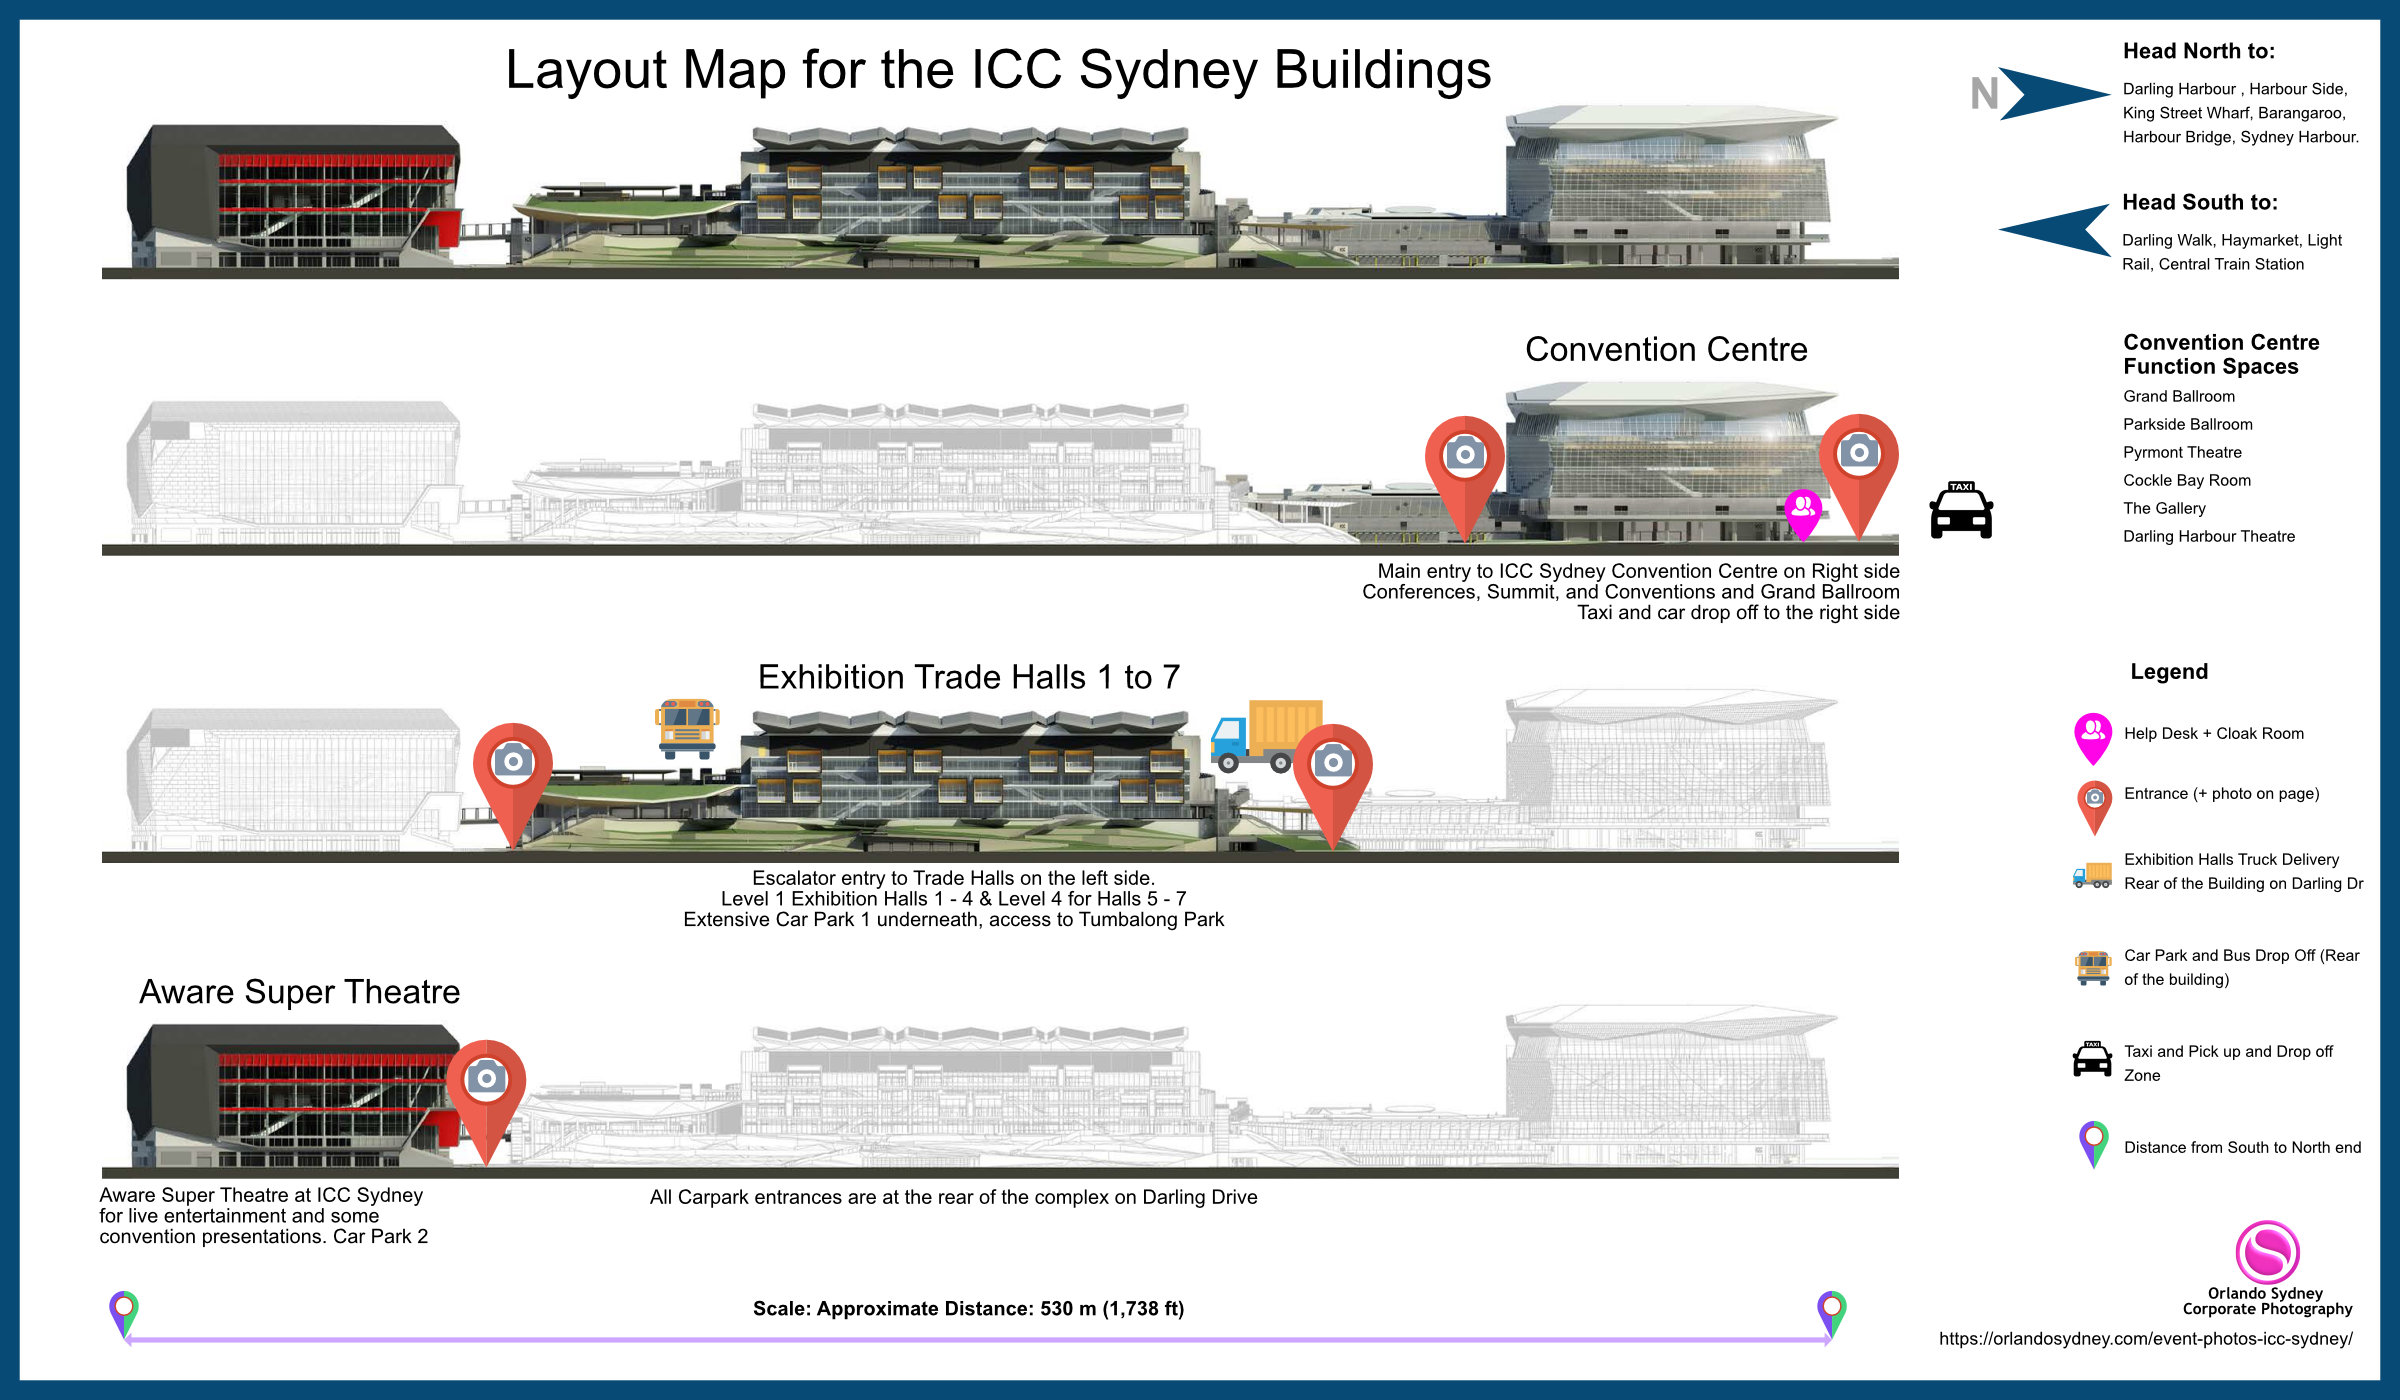 Layout Map for ICC Sydney Buildings. Diagram Showing Relative location, Distance, Convention Centre, the Exhibition Trade Halls, Aware Super Theatre. Corporate Photography by OrlandoSydney.com